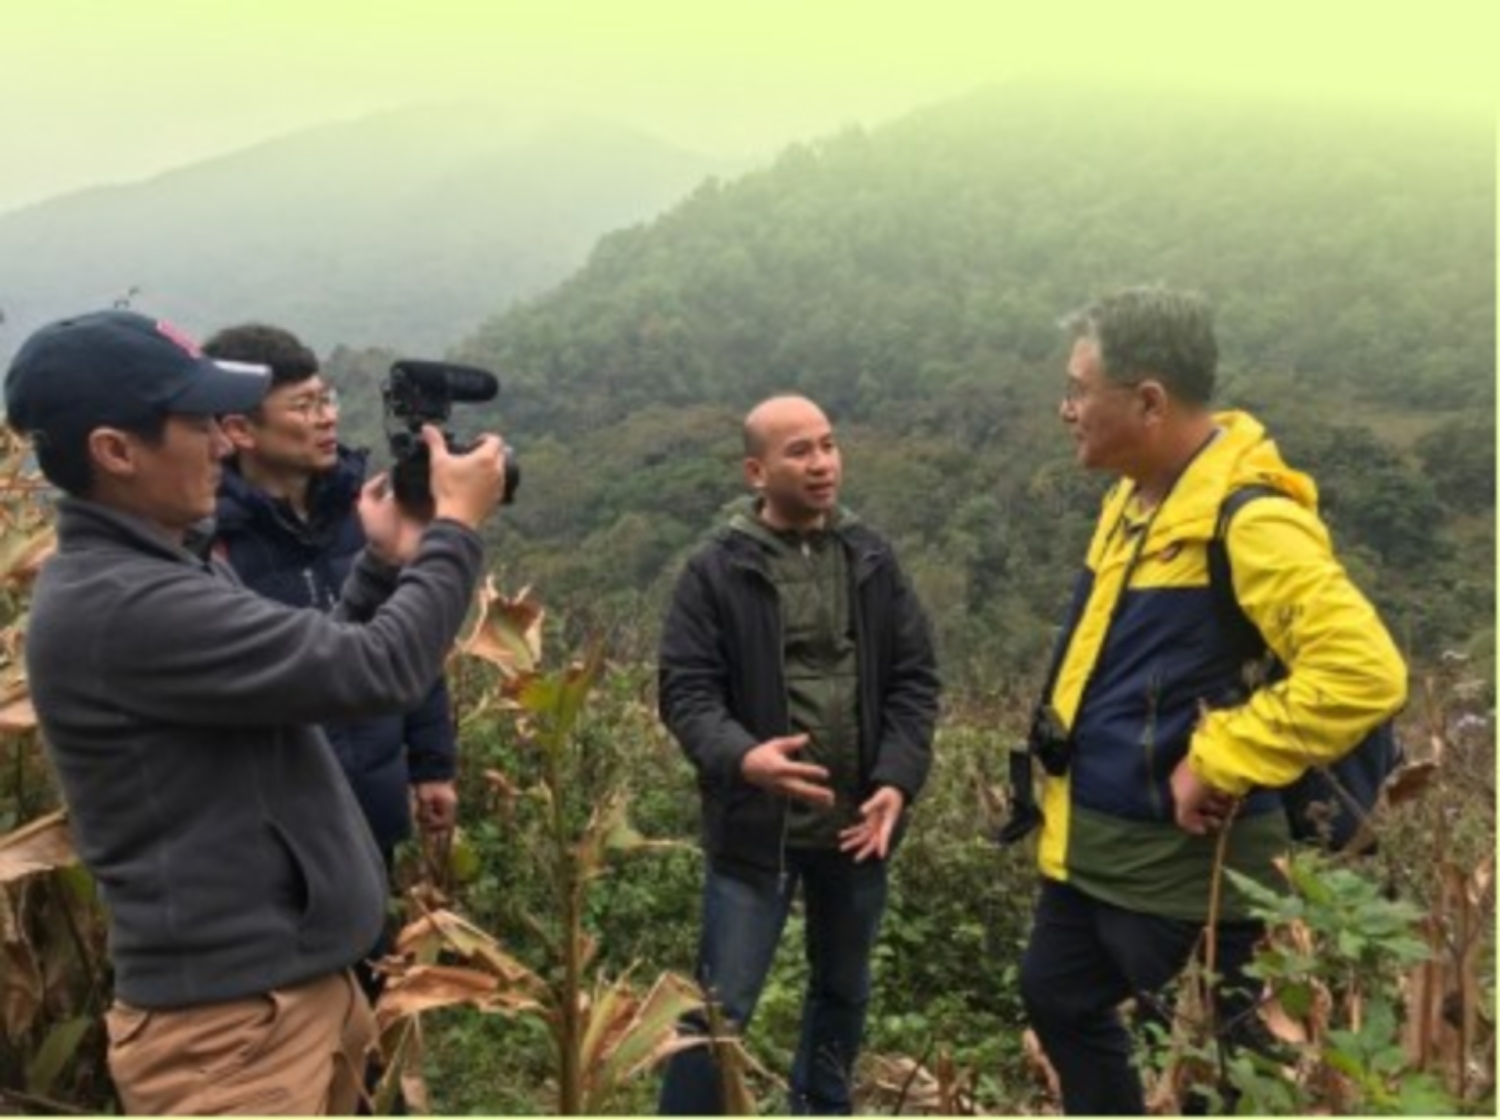 UNESCO global geopark video promotion production team in Cao Bang